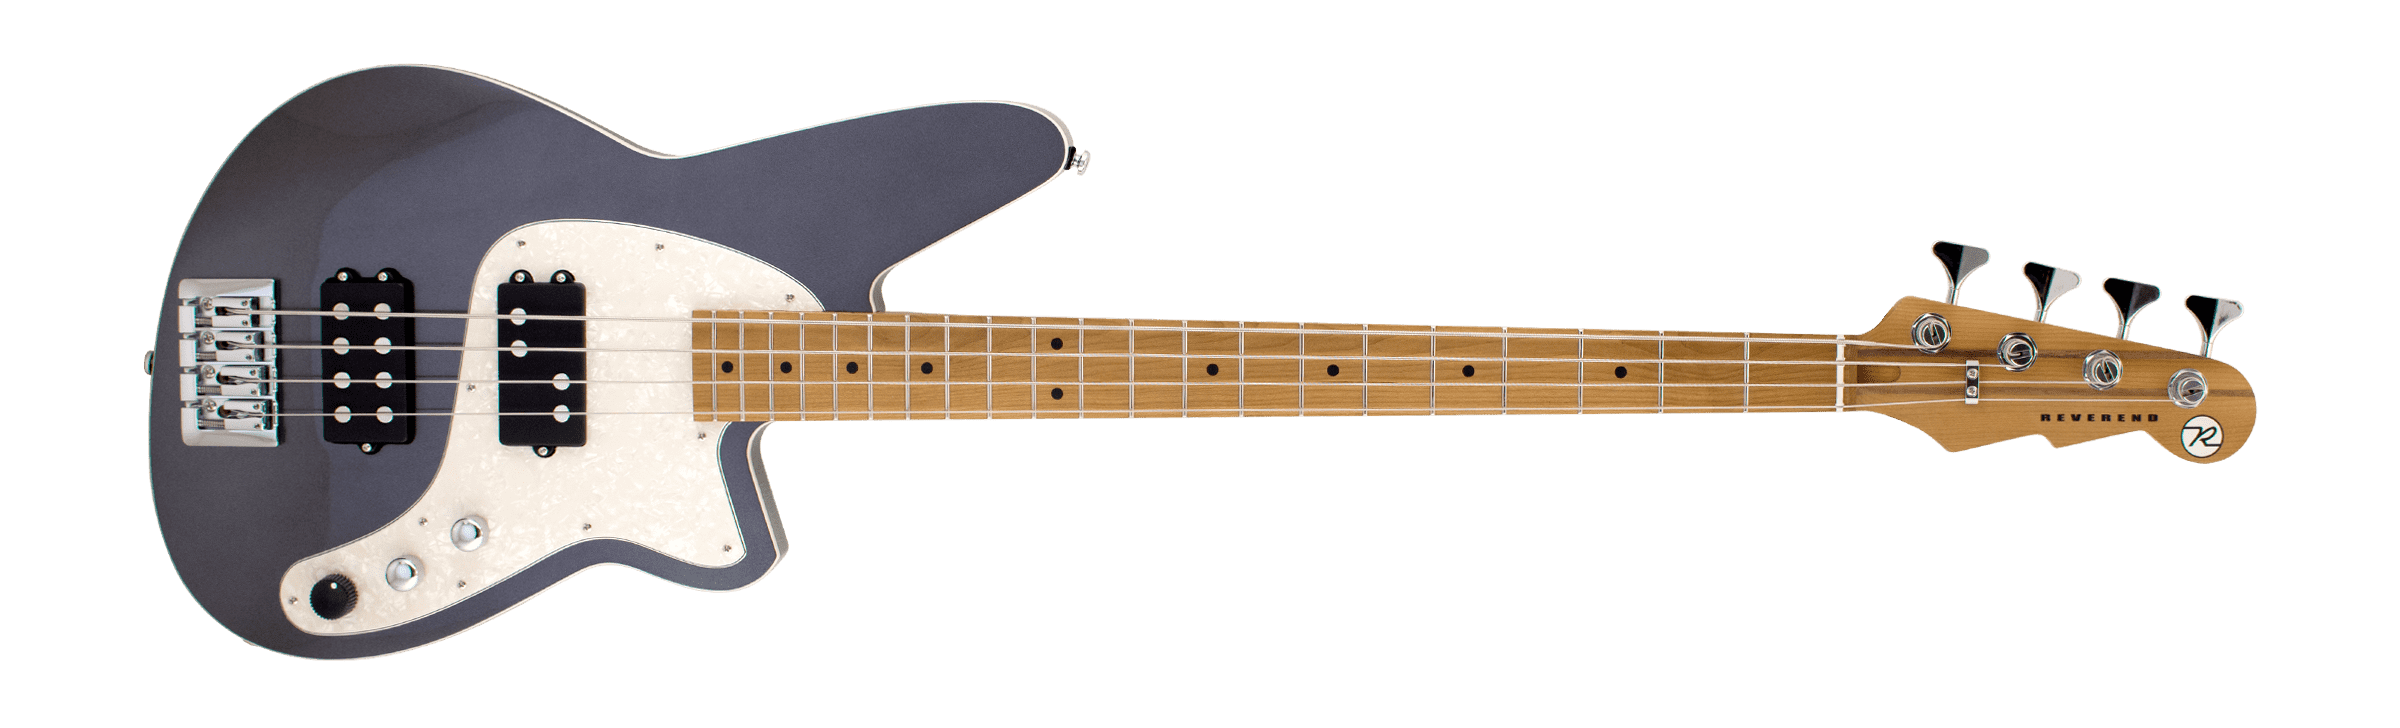 Mercalli 4 Bass - Reverend Guitars | We know what players want.